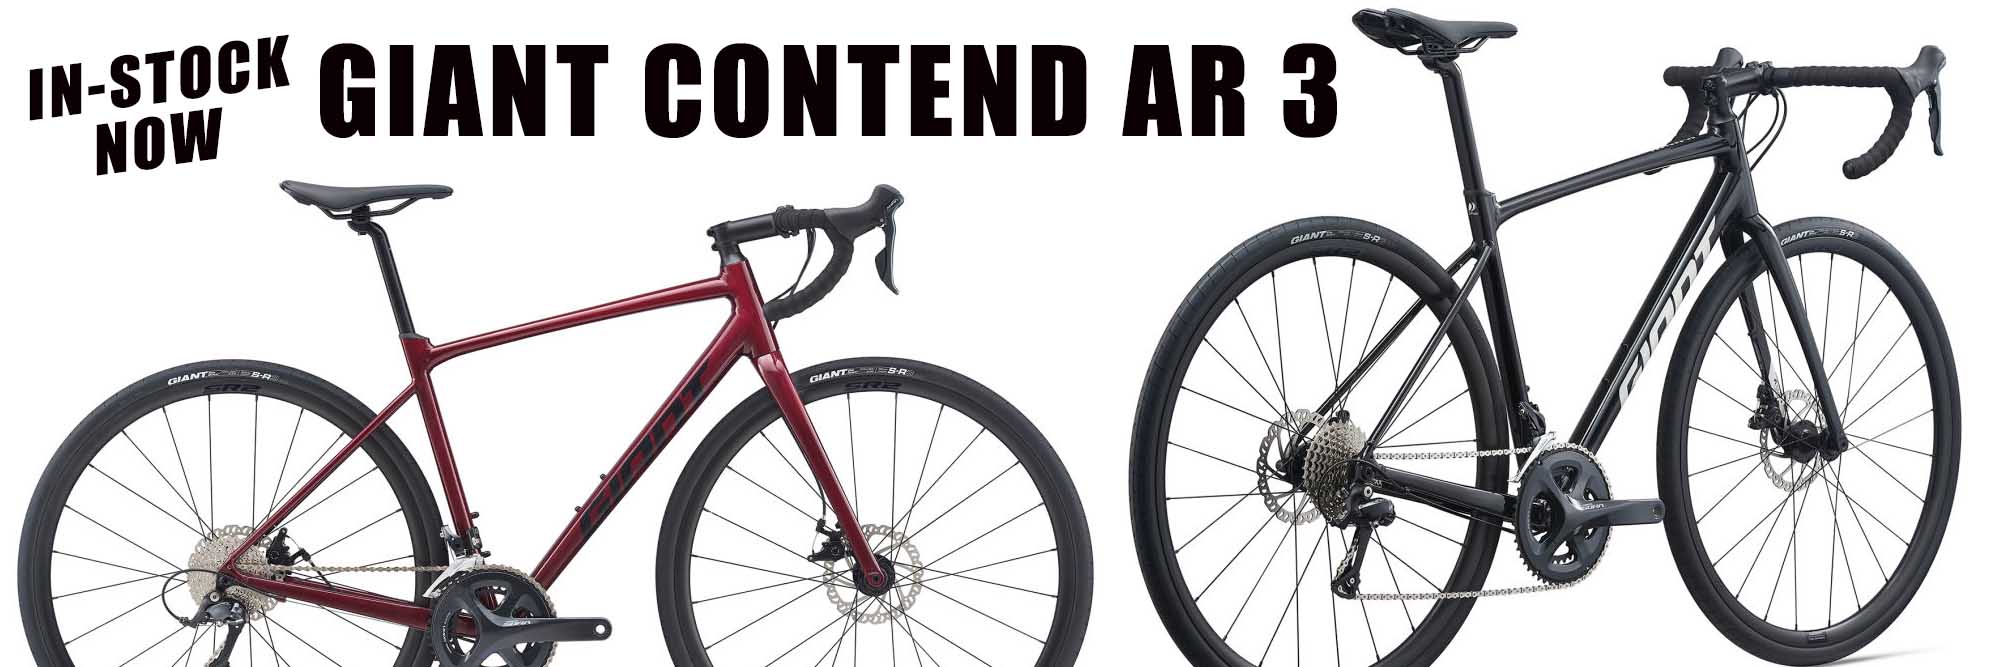 The Giant Contend AR 3 - In-Stock Now